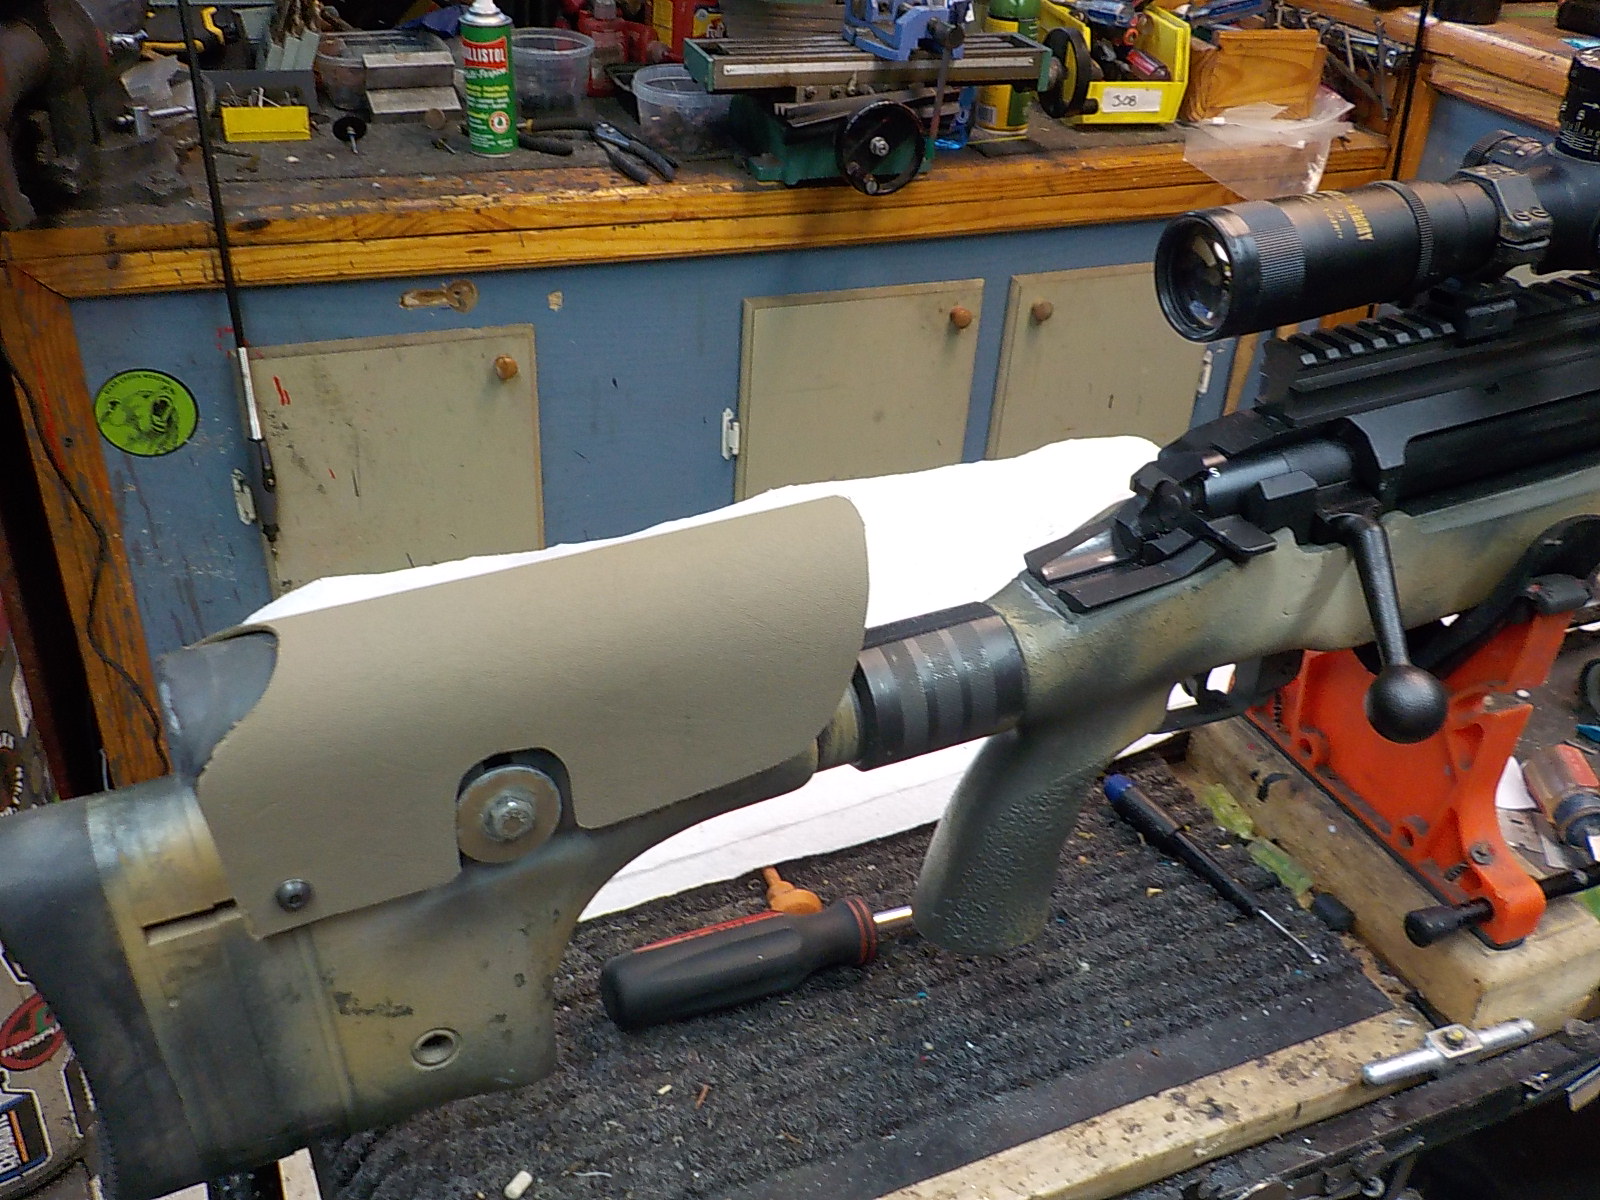 McMillan/TrackingPoint .50 BMG Precision Guided Rifle (PGR): Meet